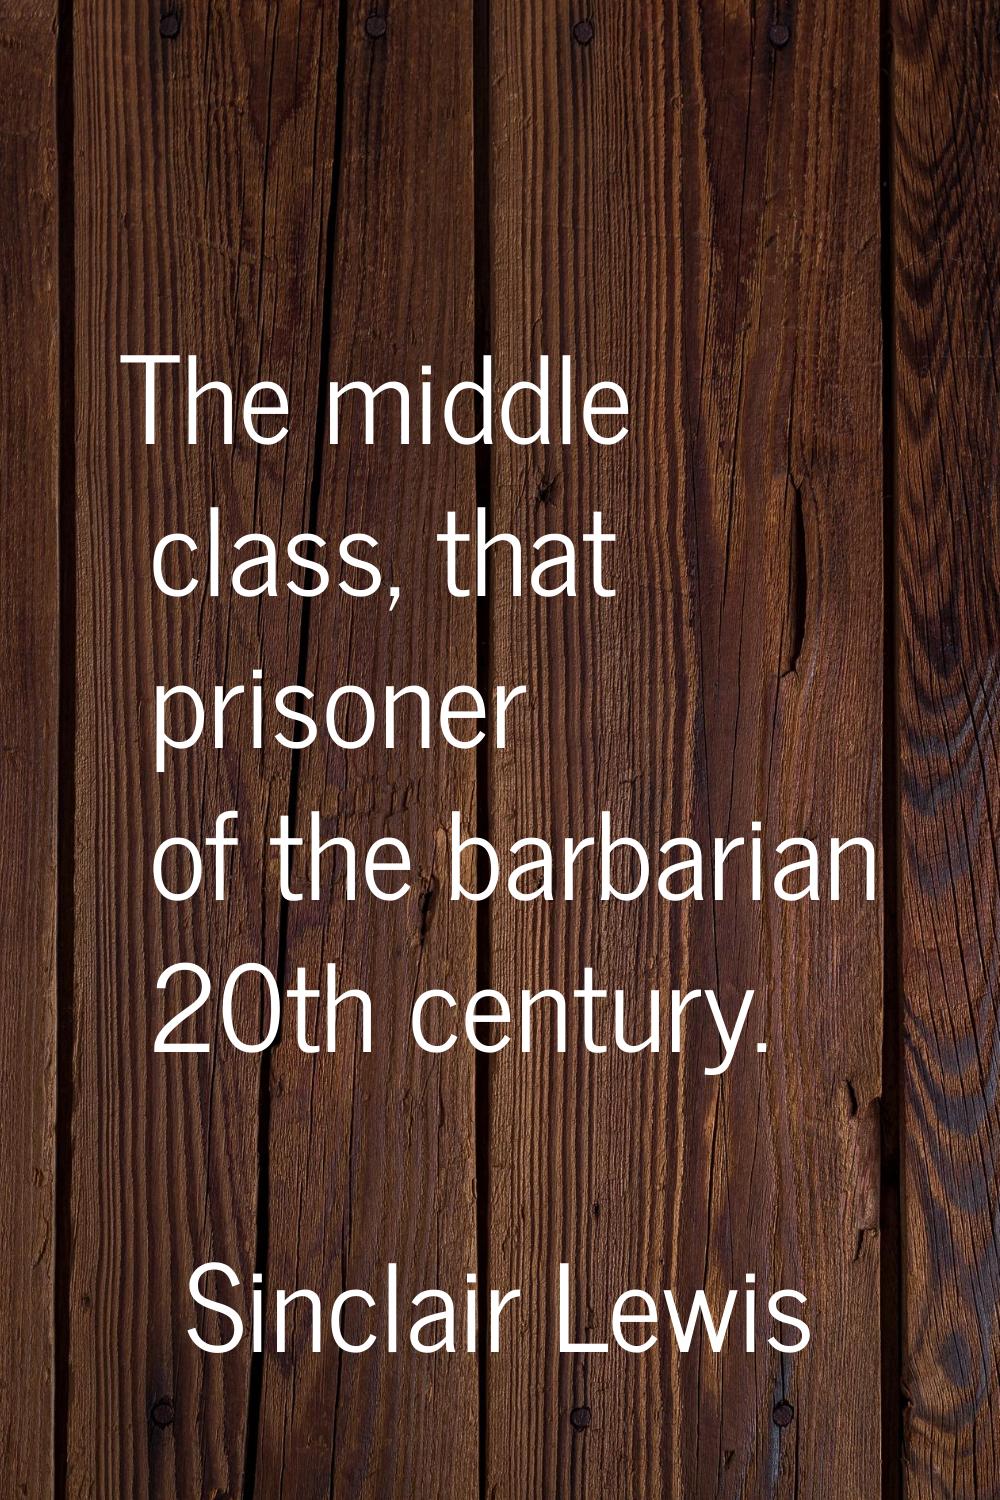 The middle class, that prisoner of the barbarian 20th century.